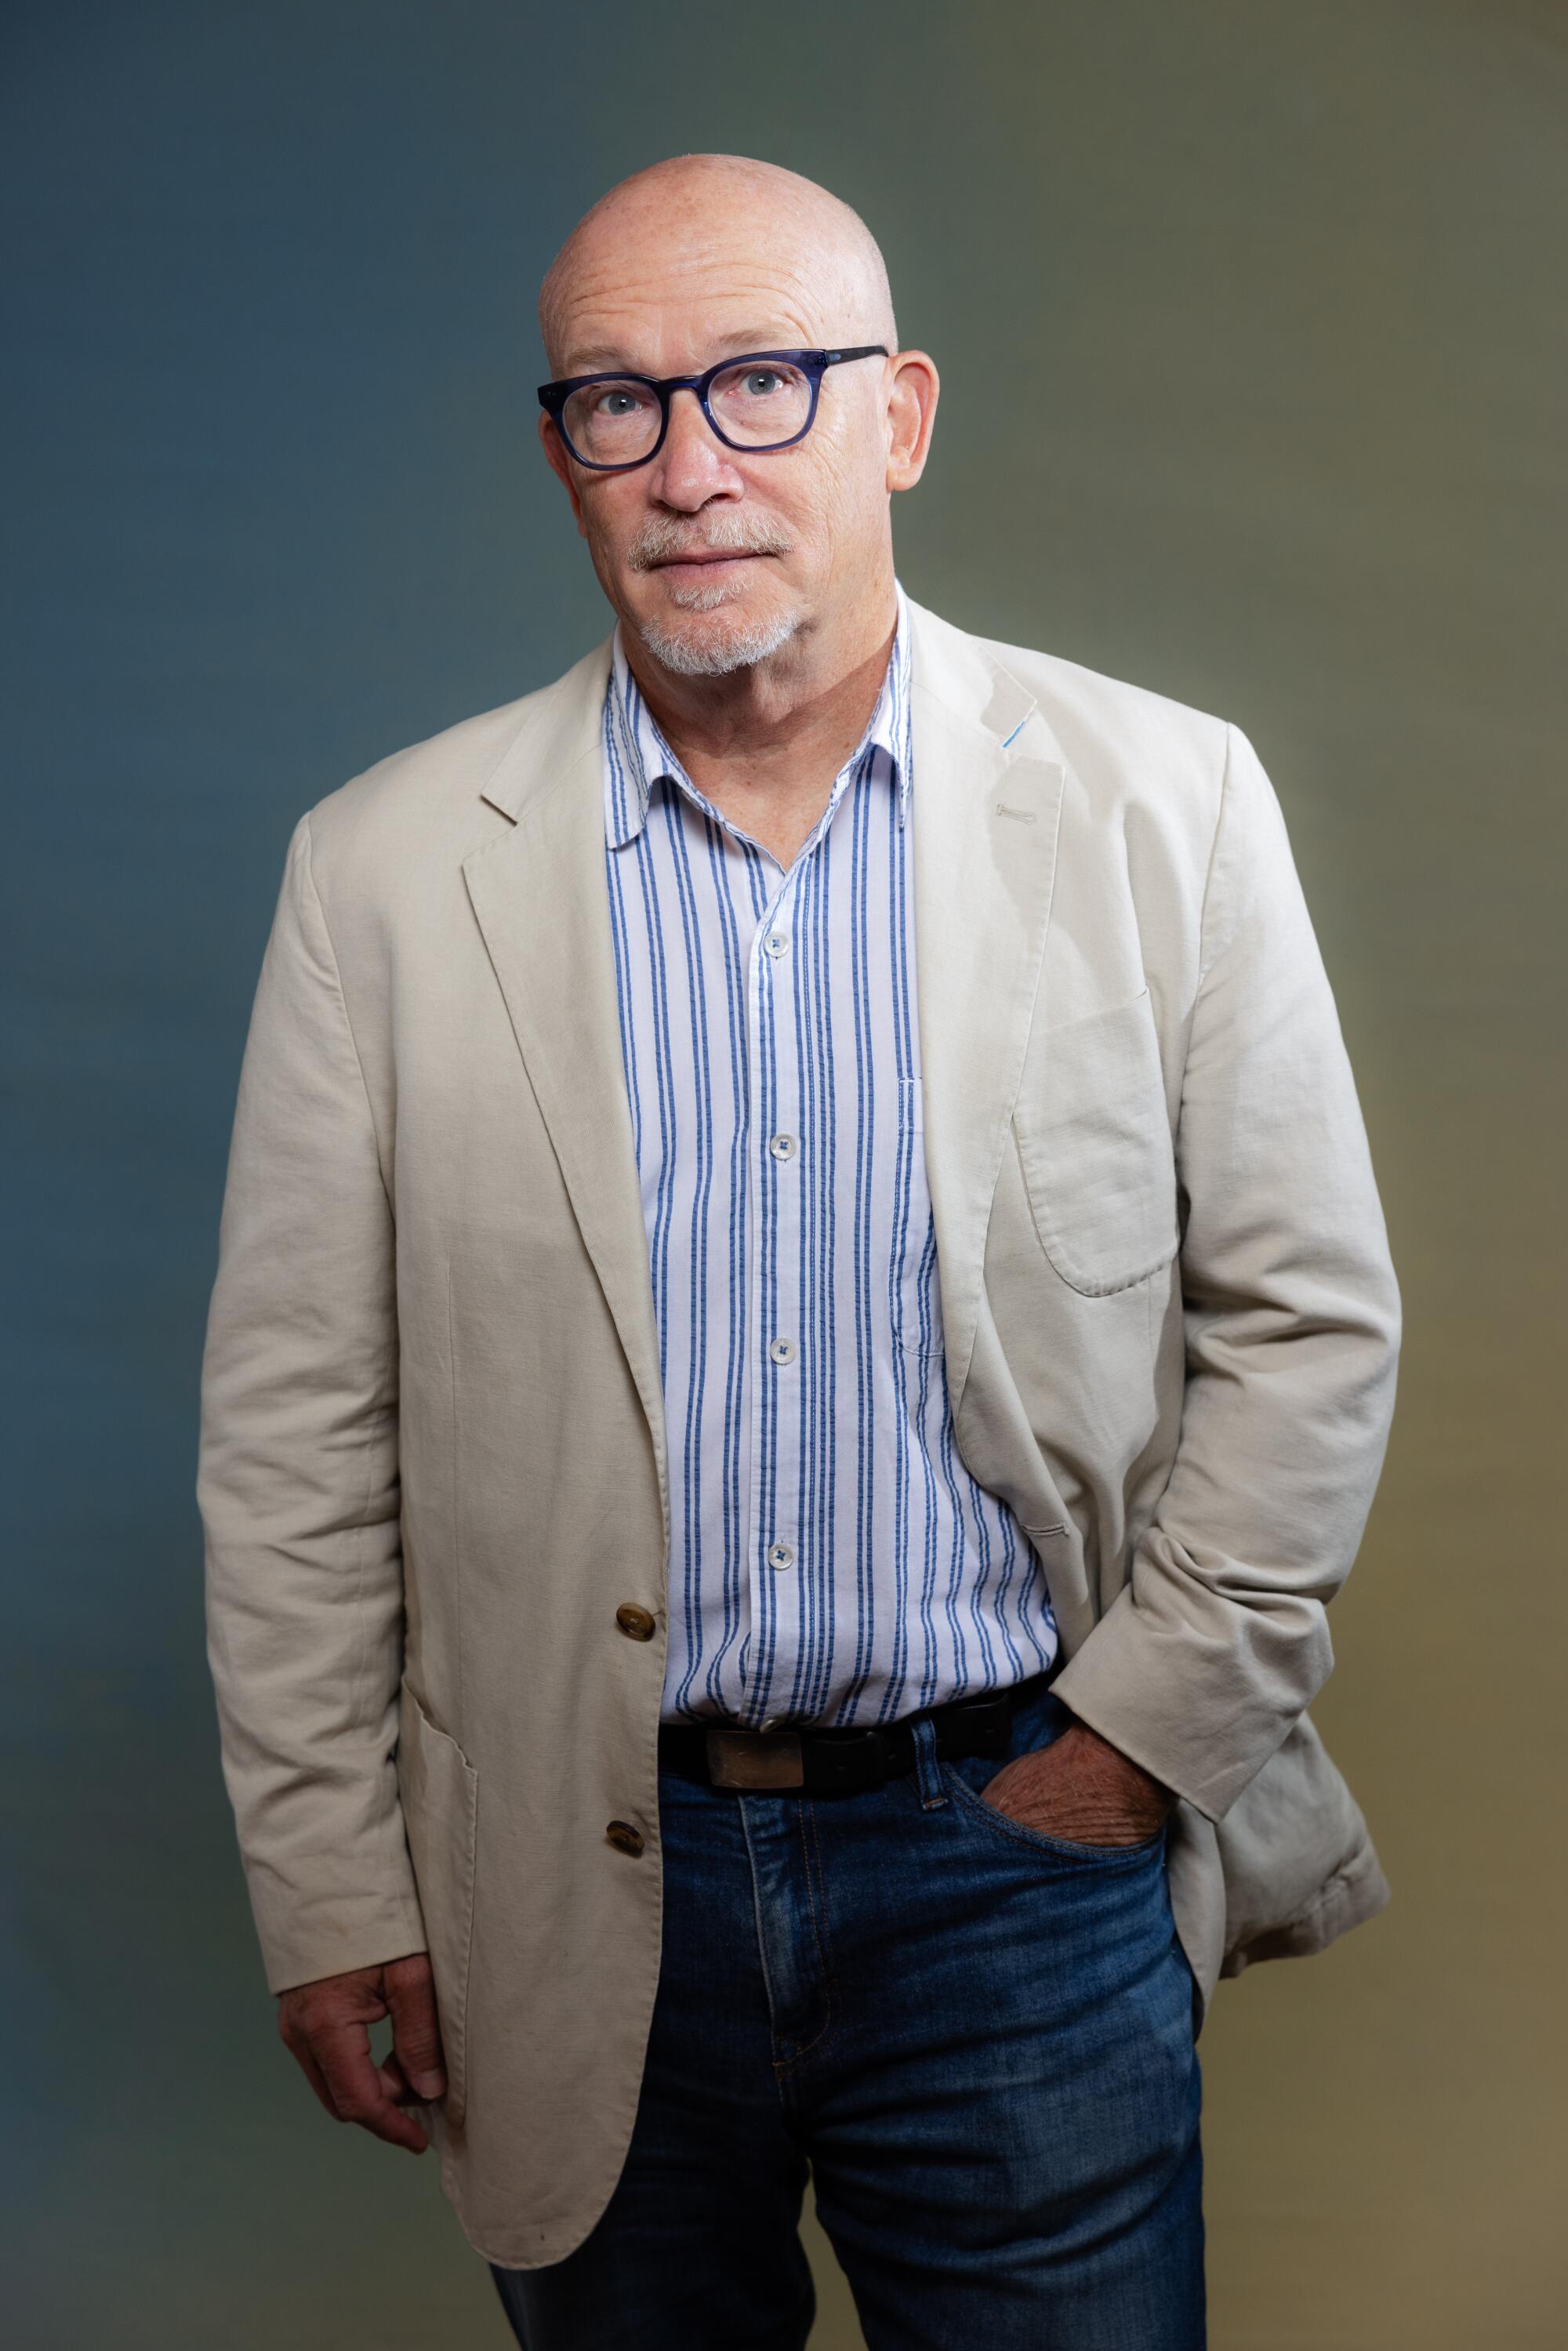 Alex Gibney stands with a hand in his pants pocket while wearing a striped shirt and jacket.